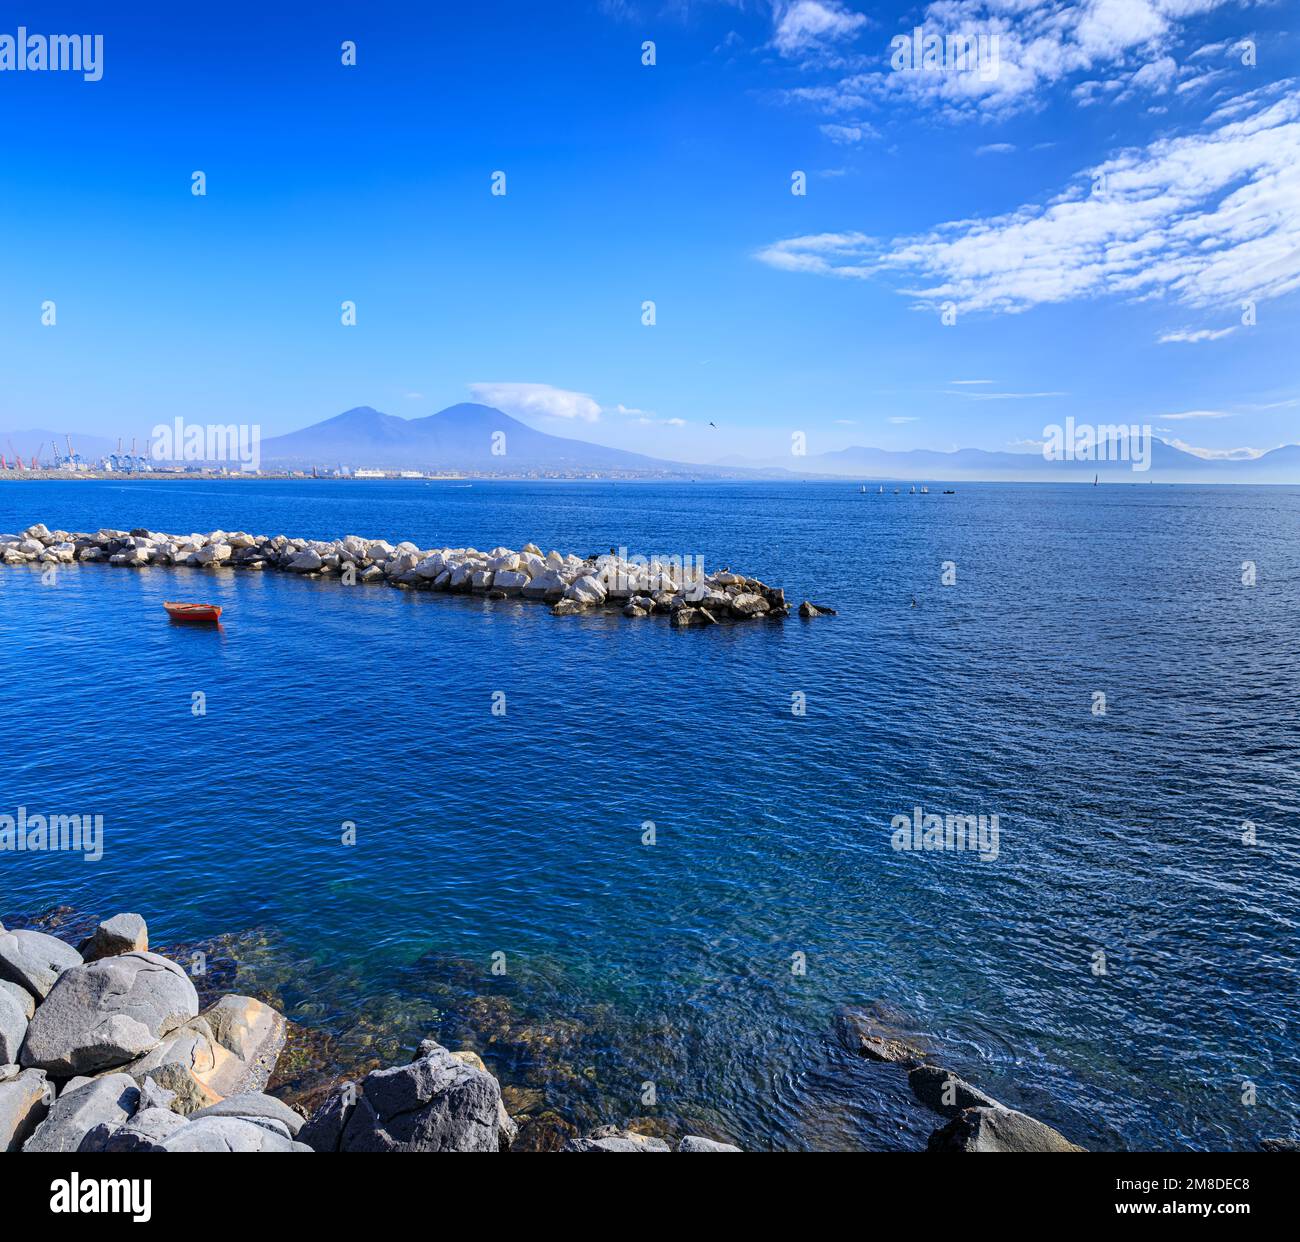 Cityscape of Naples from the waterfront: view of the Gulf of Naples with Vesuvius in the background. Stock Photo